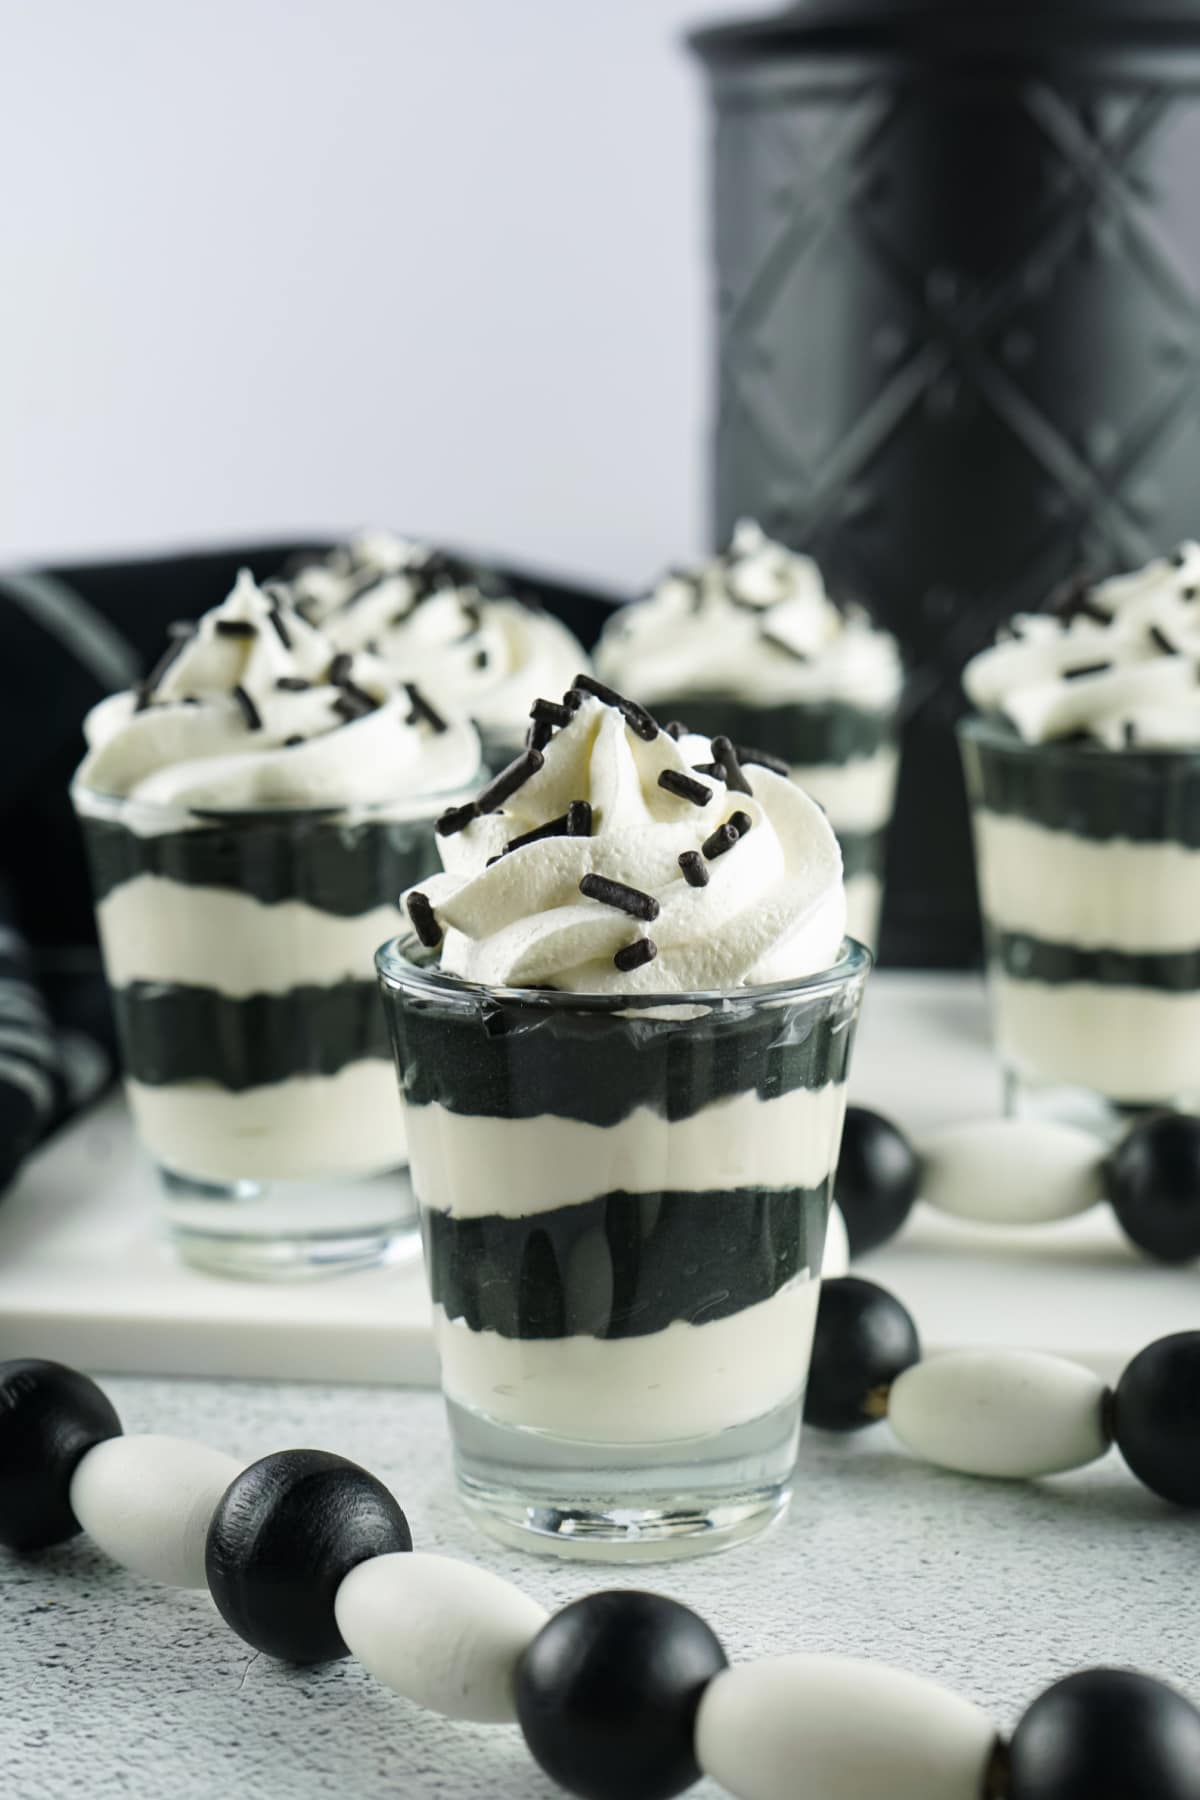 Halloween pudding shots with whipped cream